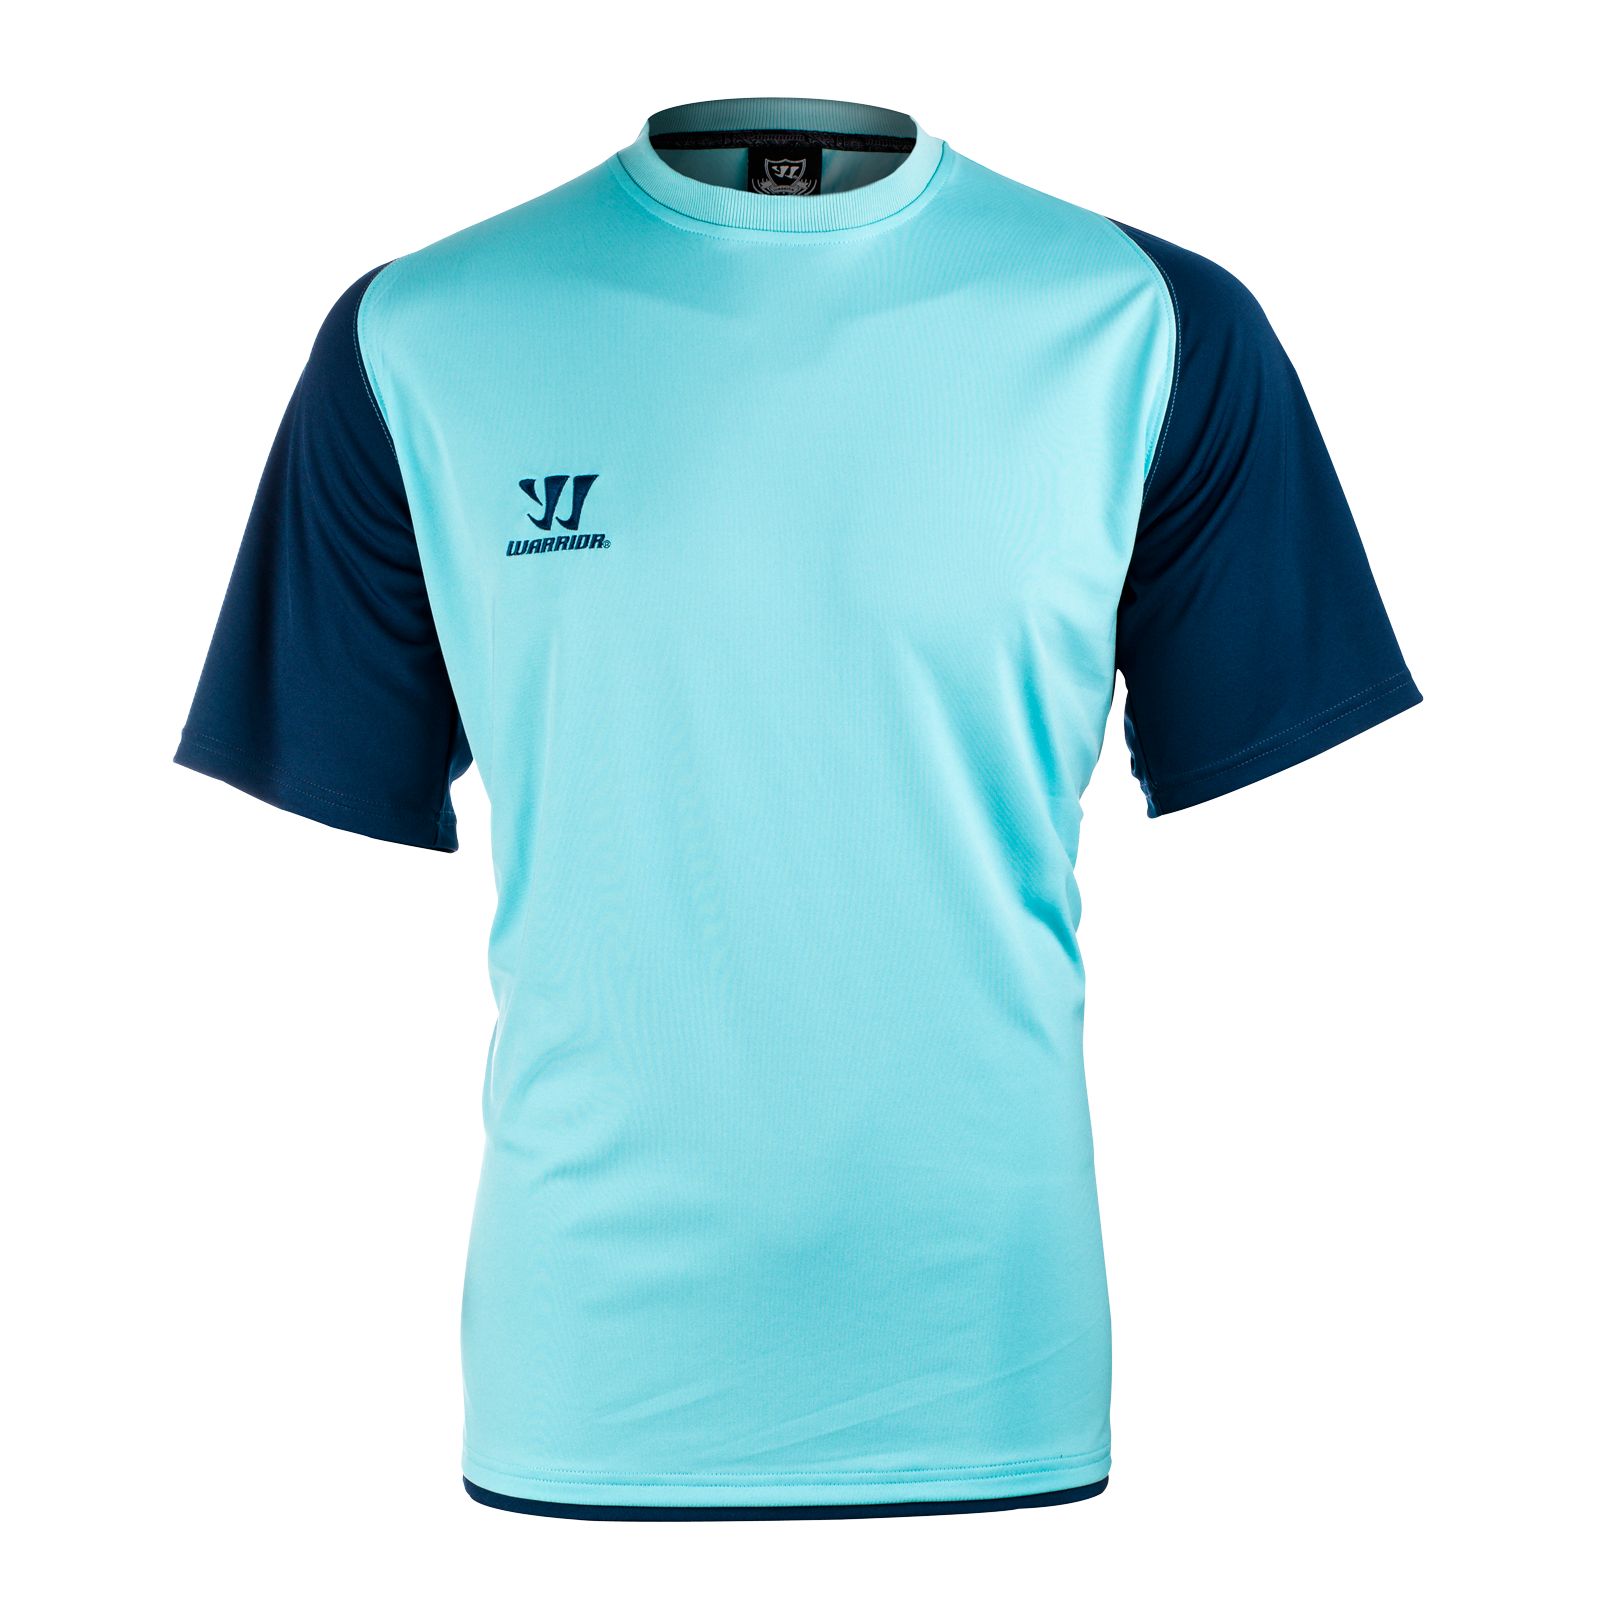 Skreamer Training SS Jersey, Blue Radiance with Insignia Blue & Bright Marigold image number 1